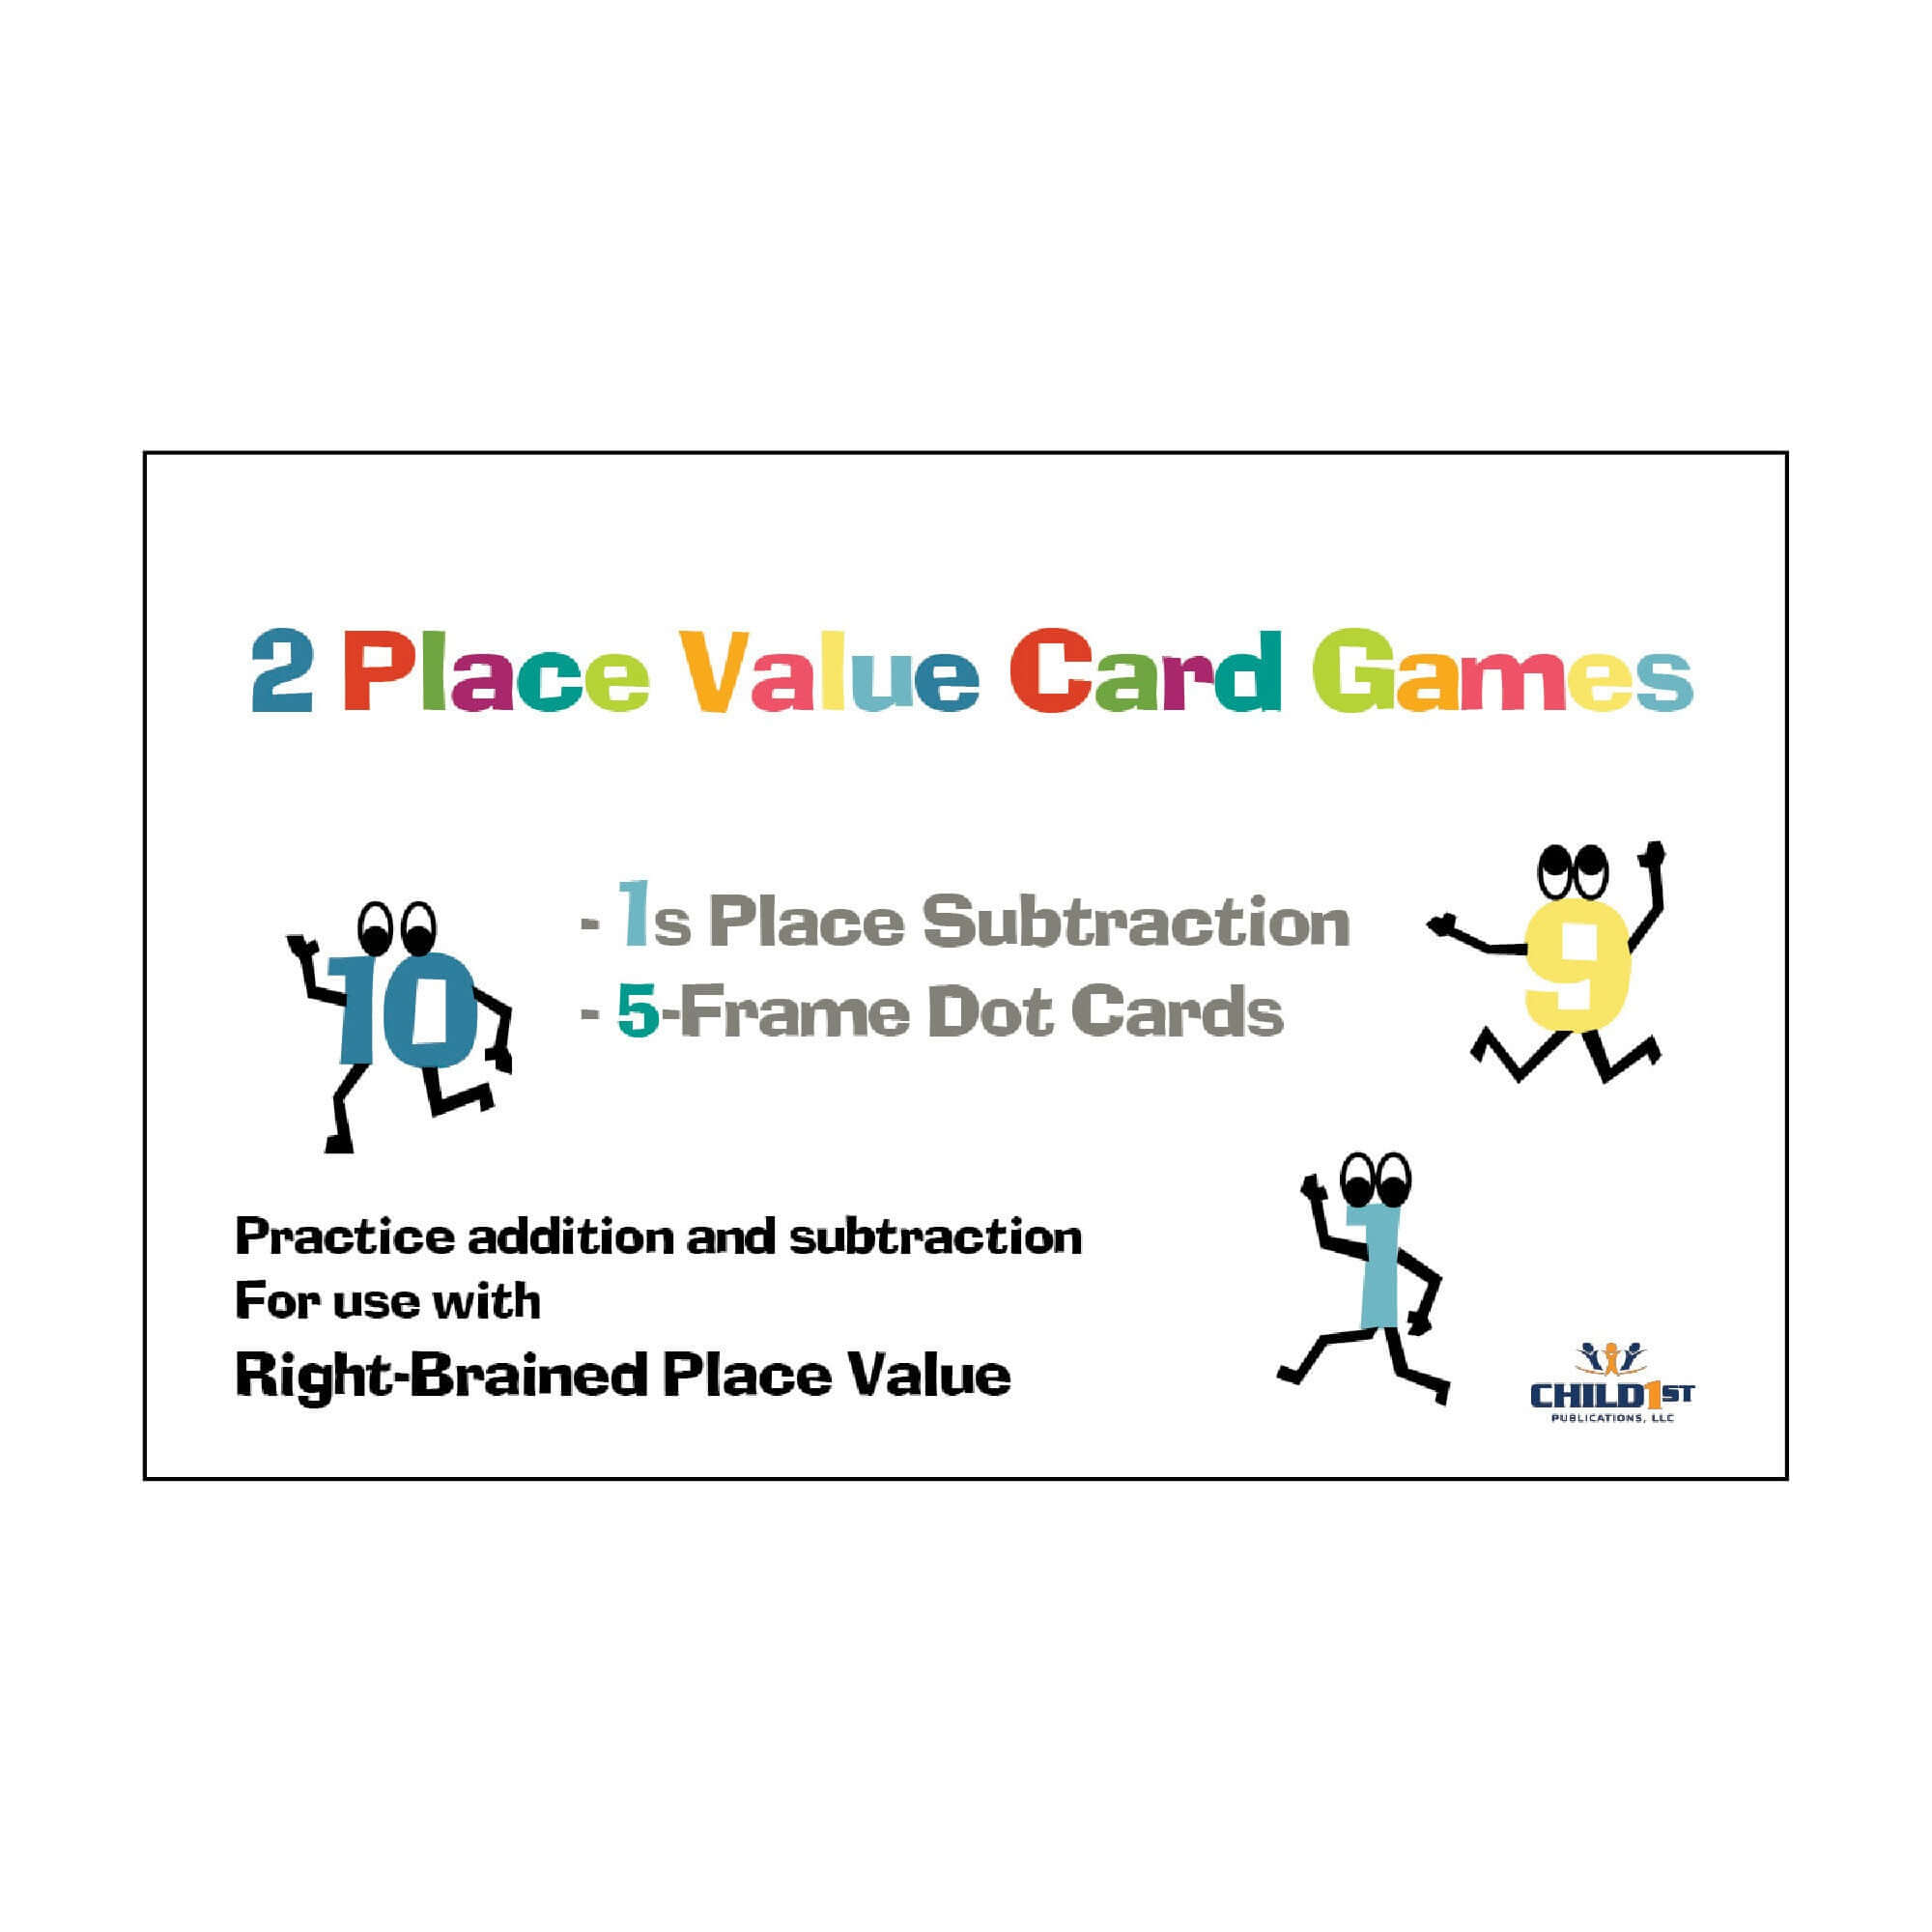 Right-Brained Place Value Subtracting 1s Cards